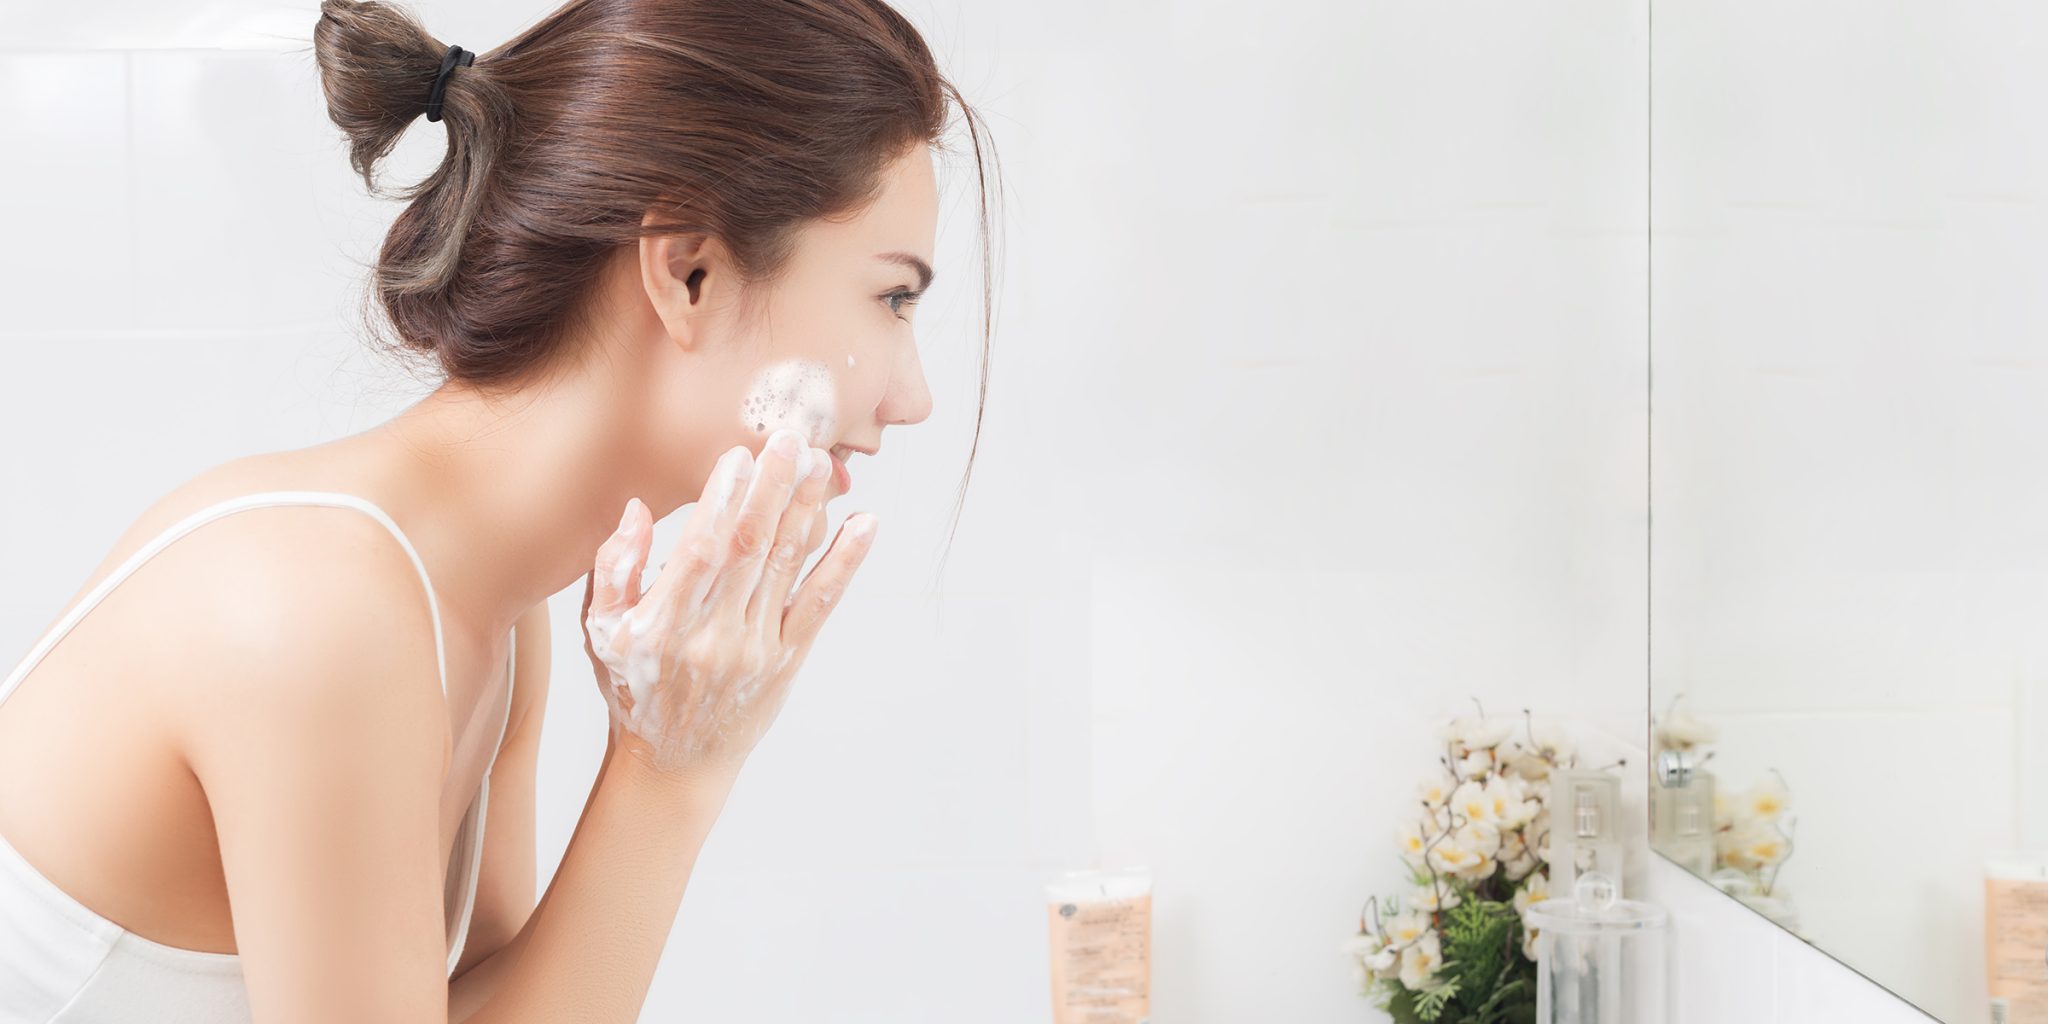 Top 10 Korean Face Wash And Cleanser For All Skin Types For Summer